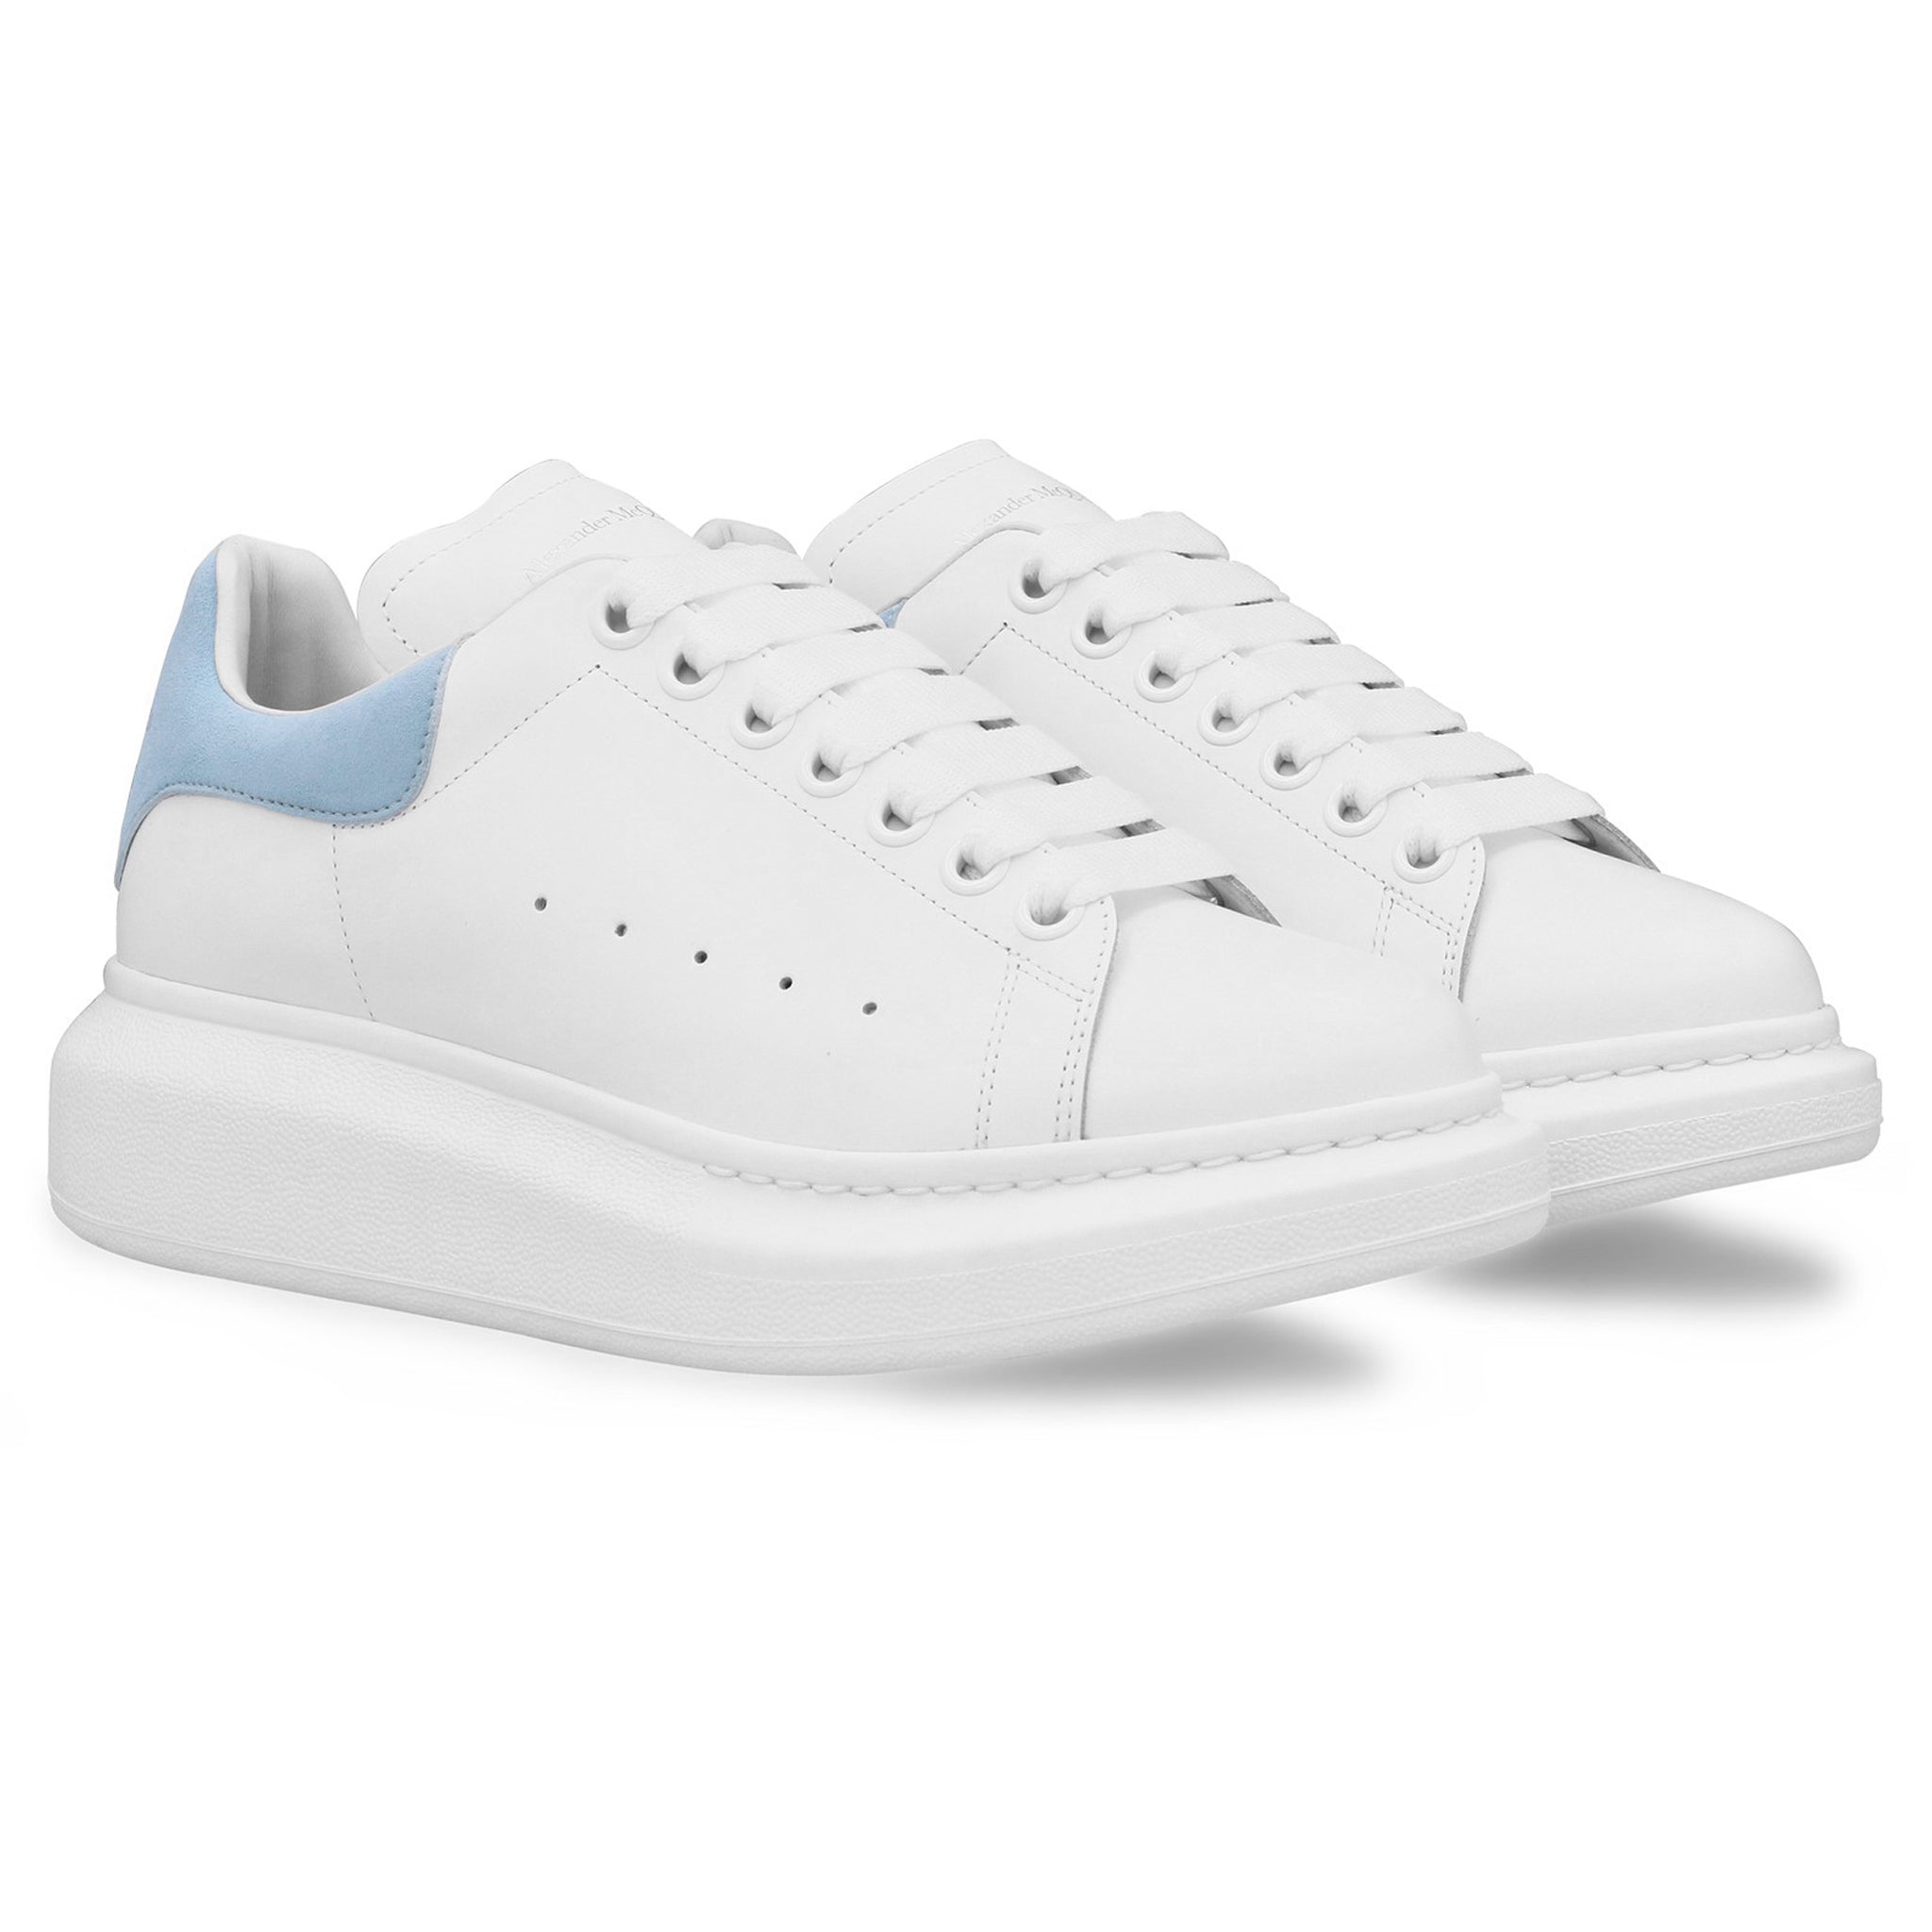 Front side view of Alexander Mcqueen Raised Sole White Blue Sneaker